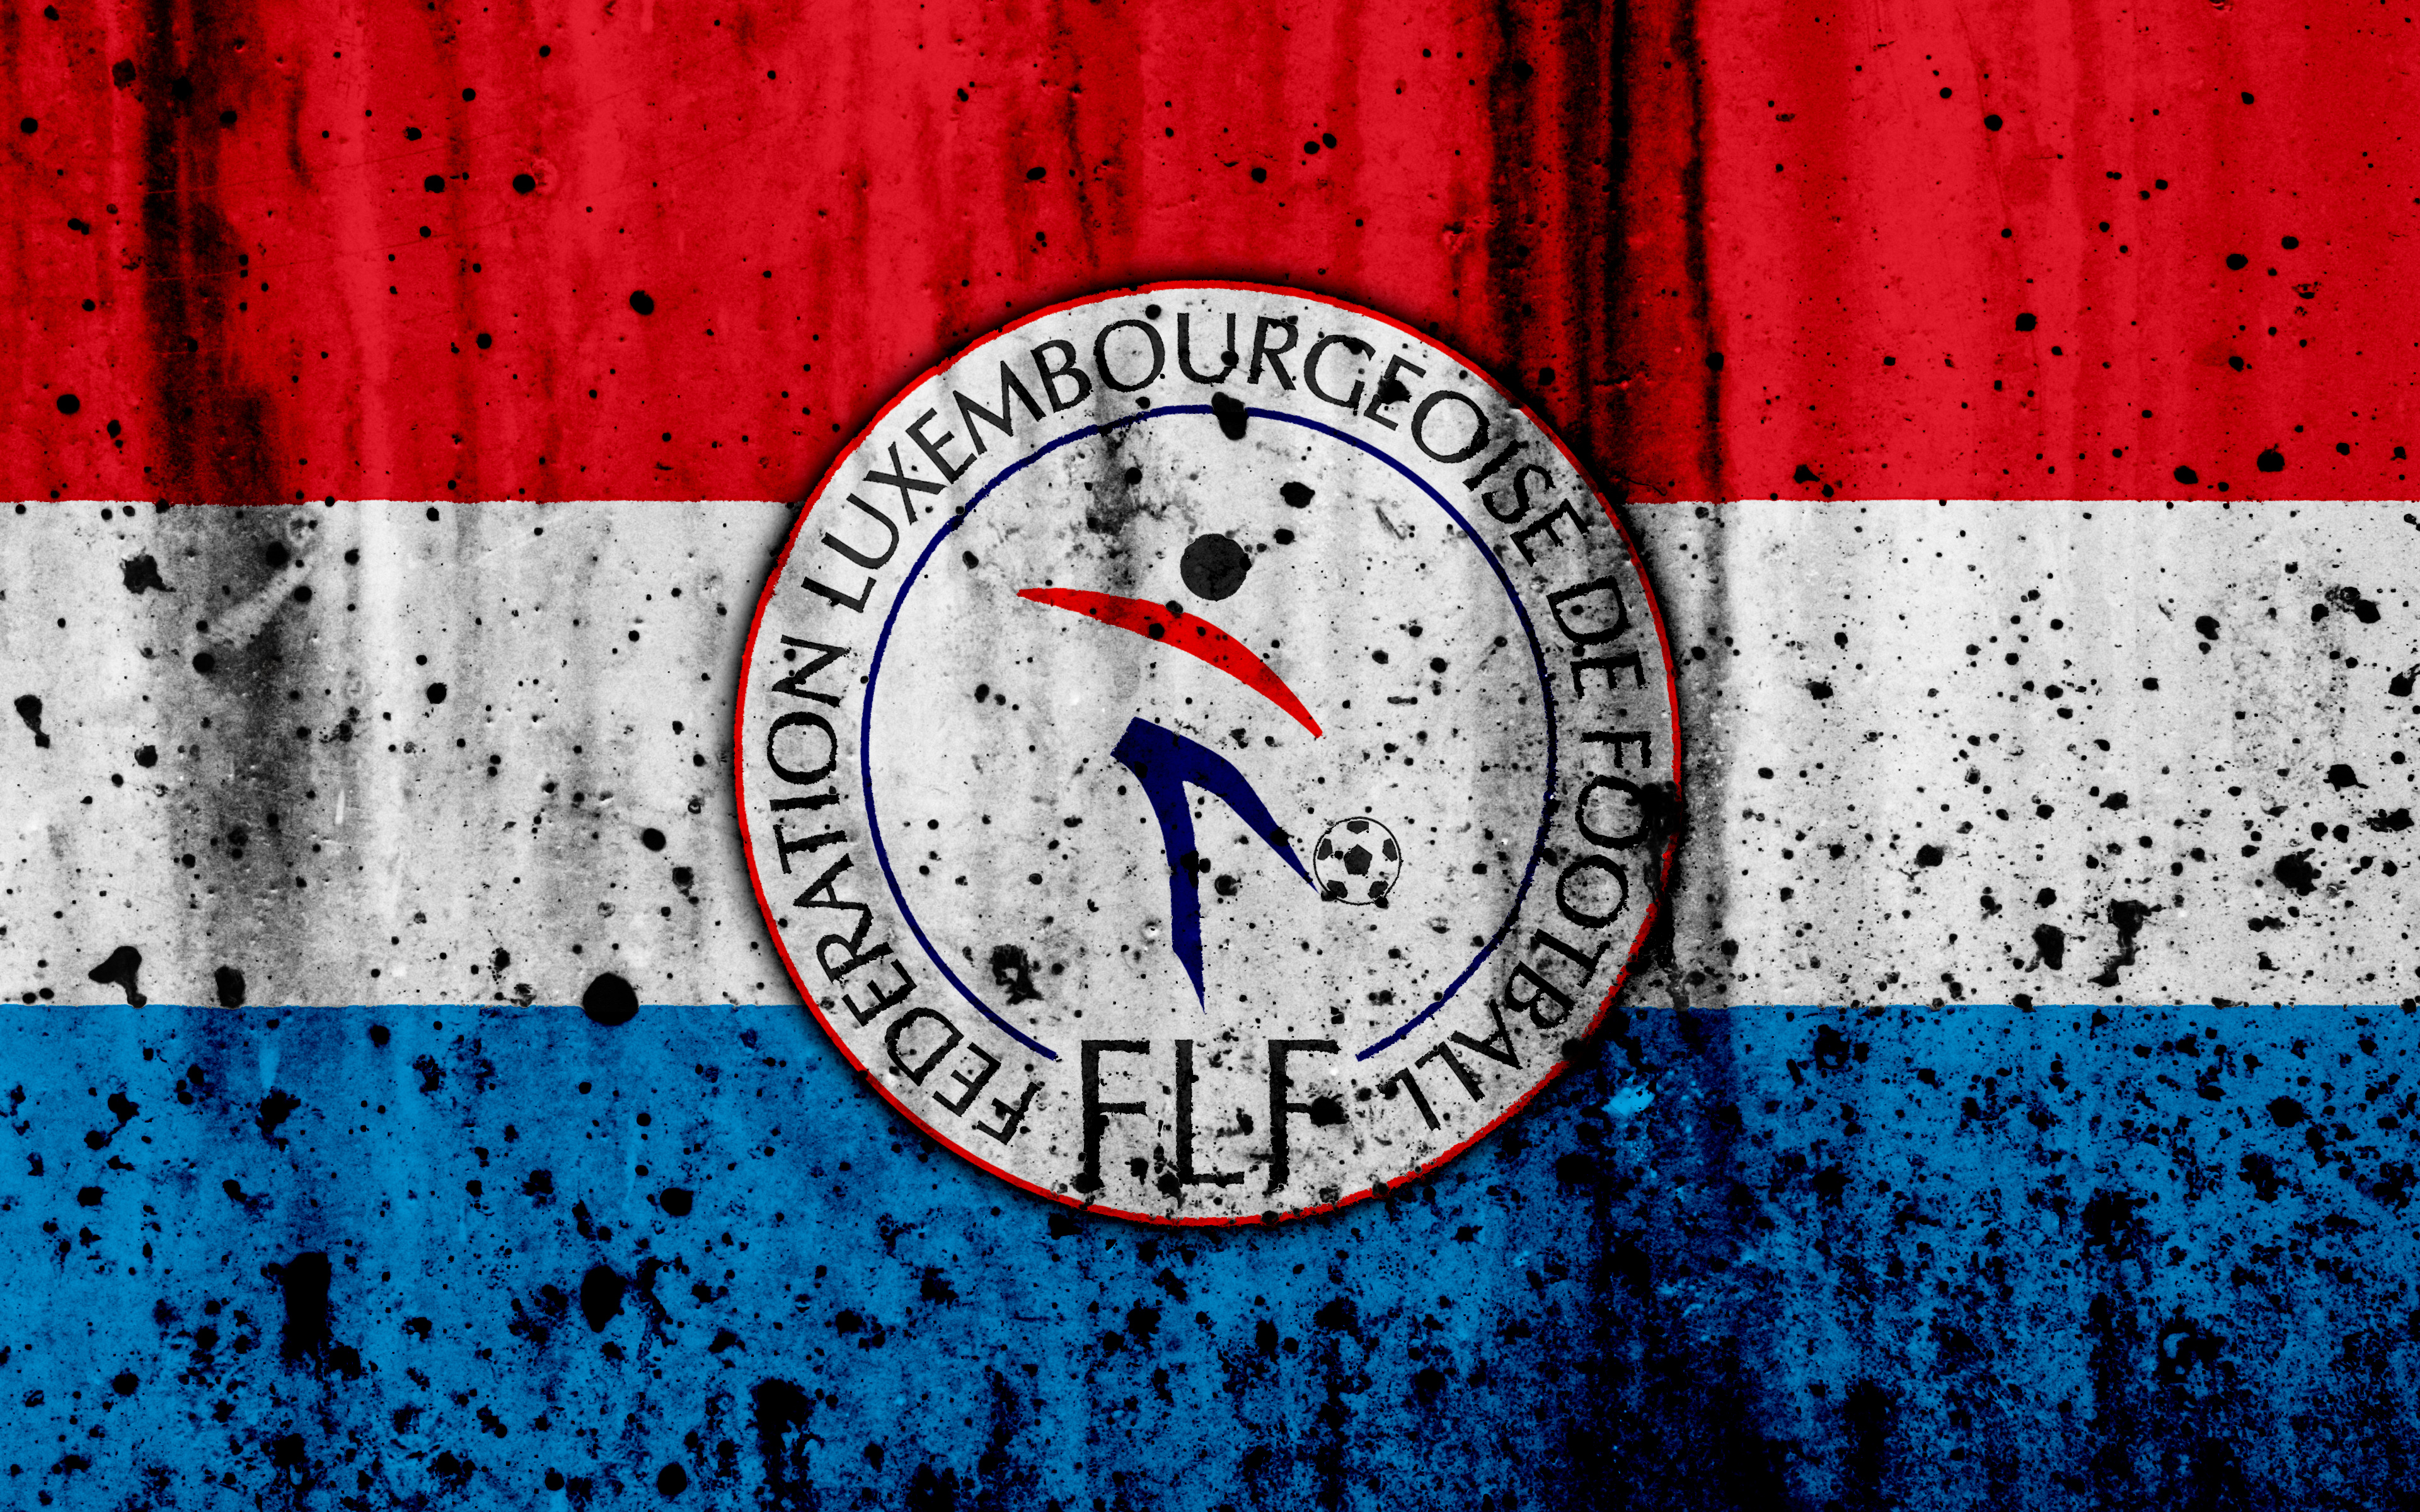 Luxembourg National Football Team Wallpapers